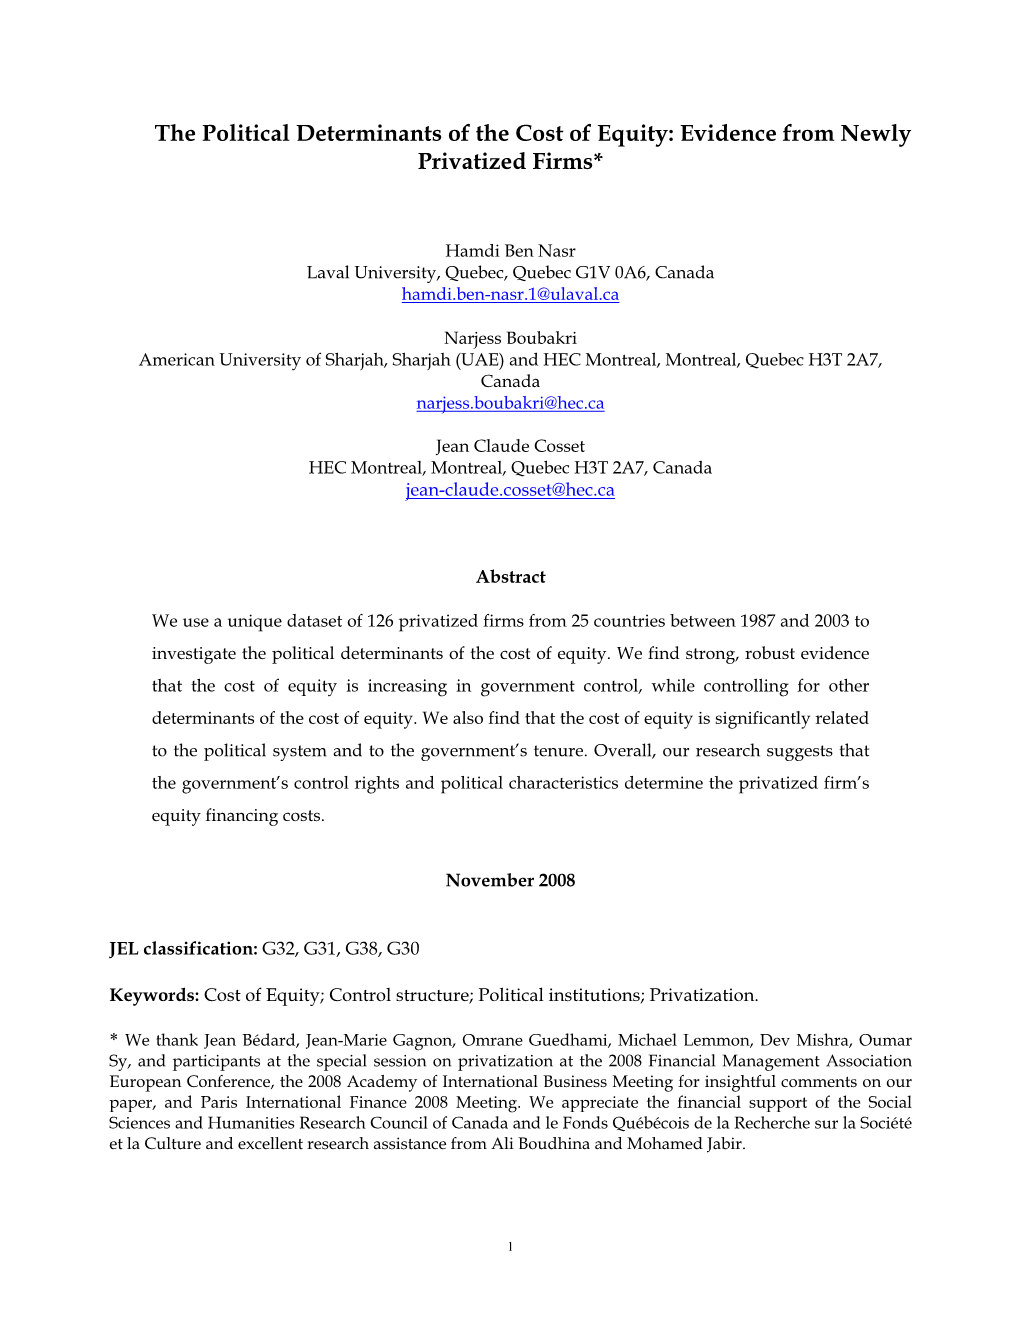 The Political Determinants of the Cost of Equity: Evidence from Newly Privatized Firms*